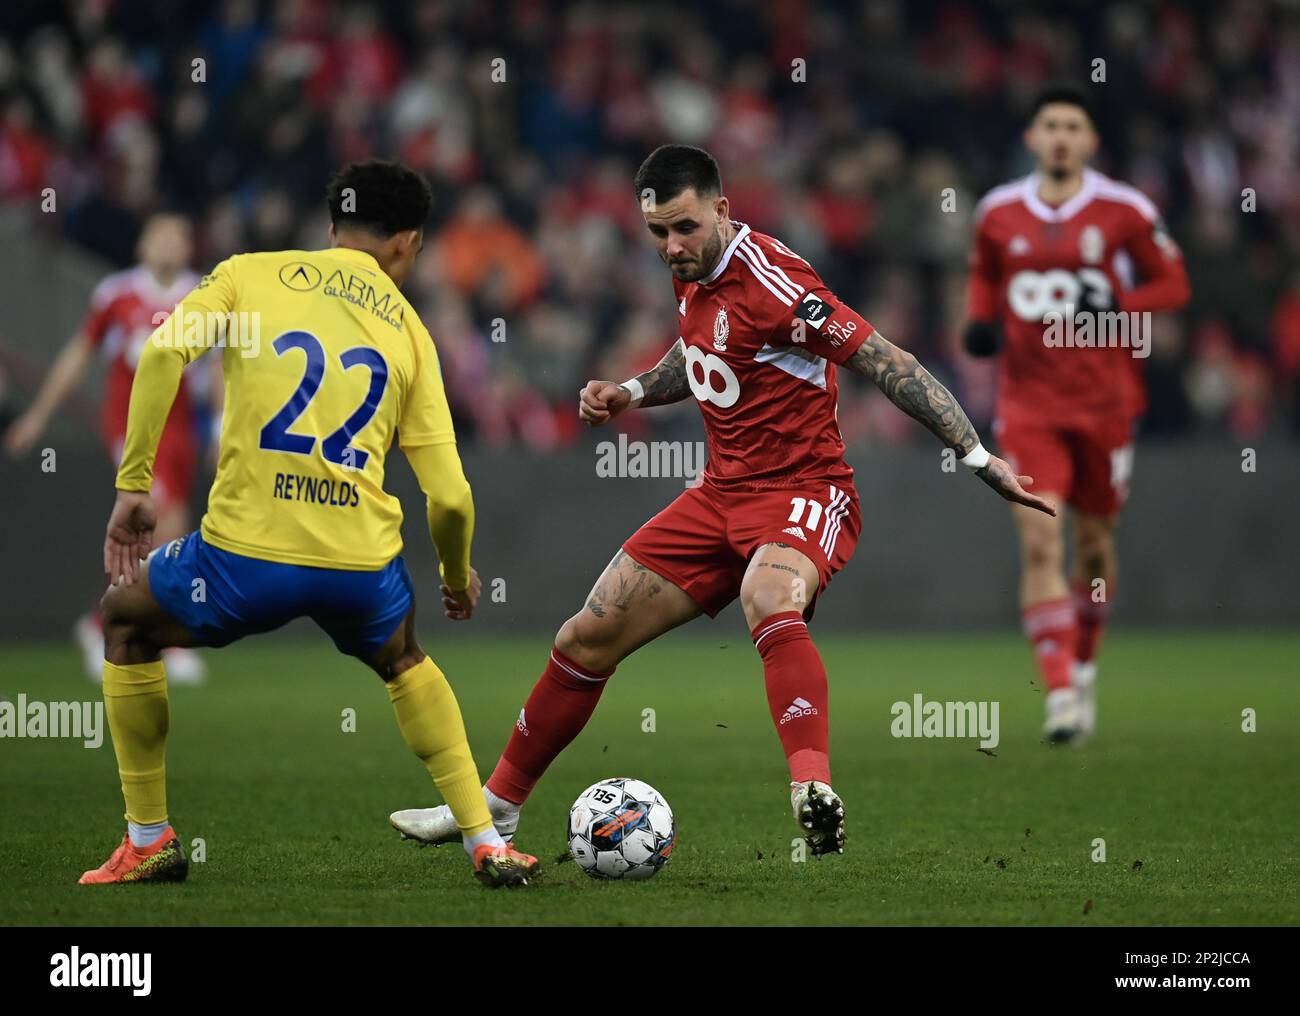 Standard's Philip Zinckernagel and Westerlo's Bryan Reynolds fight for the  ball during a soccer match between Standard de Liege and KVC Westerlo,  Saturday 04 March 2023 in Liege, on day 28 of